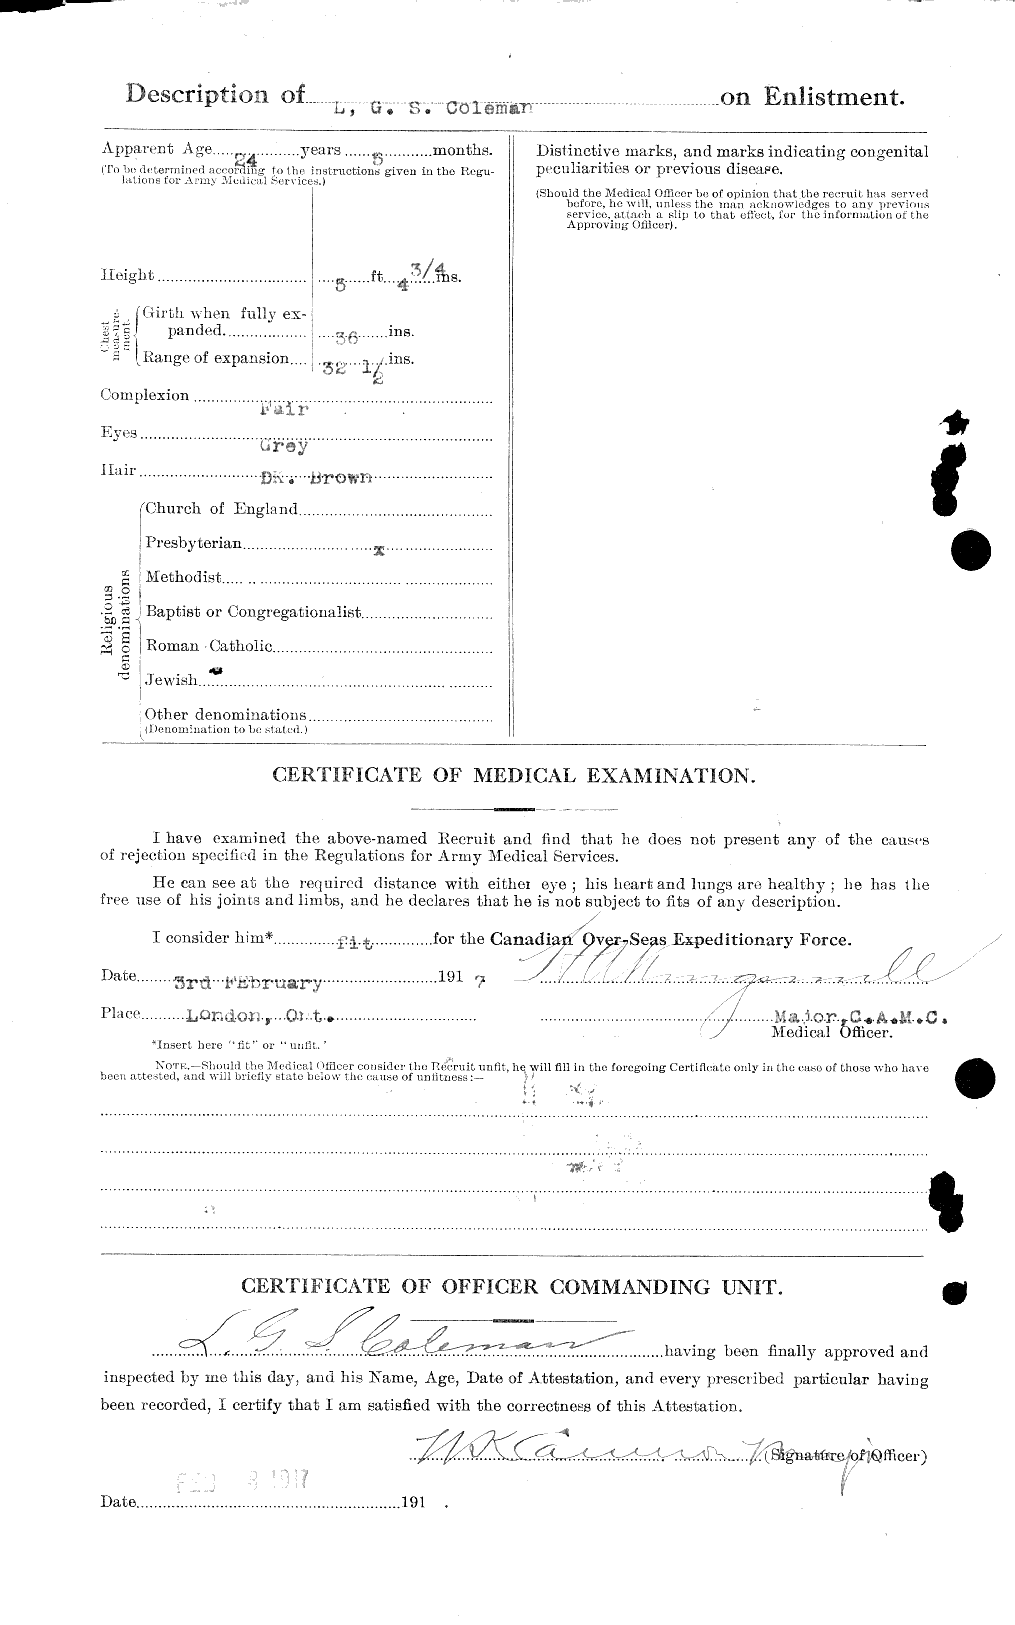 Personnel Records of the First World War - CEF 028231b